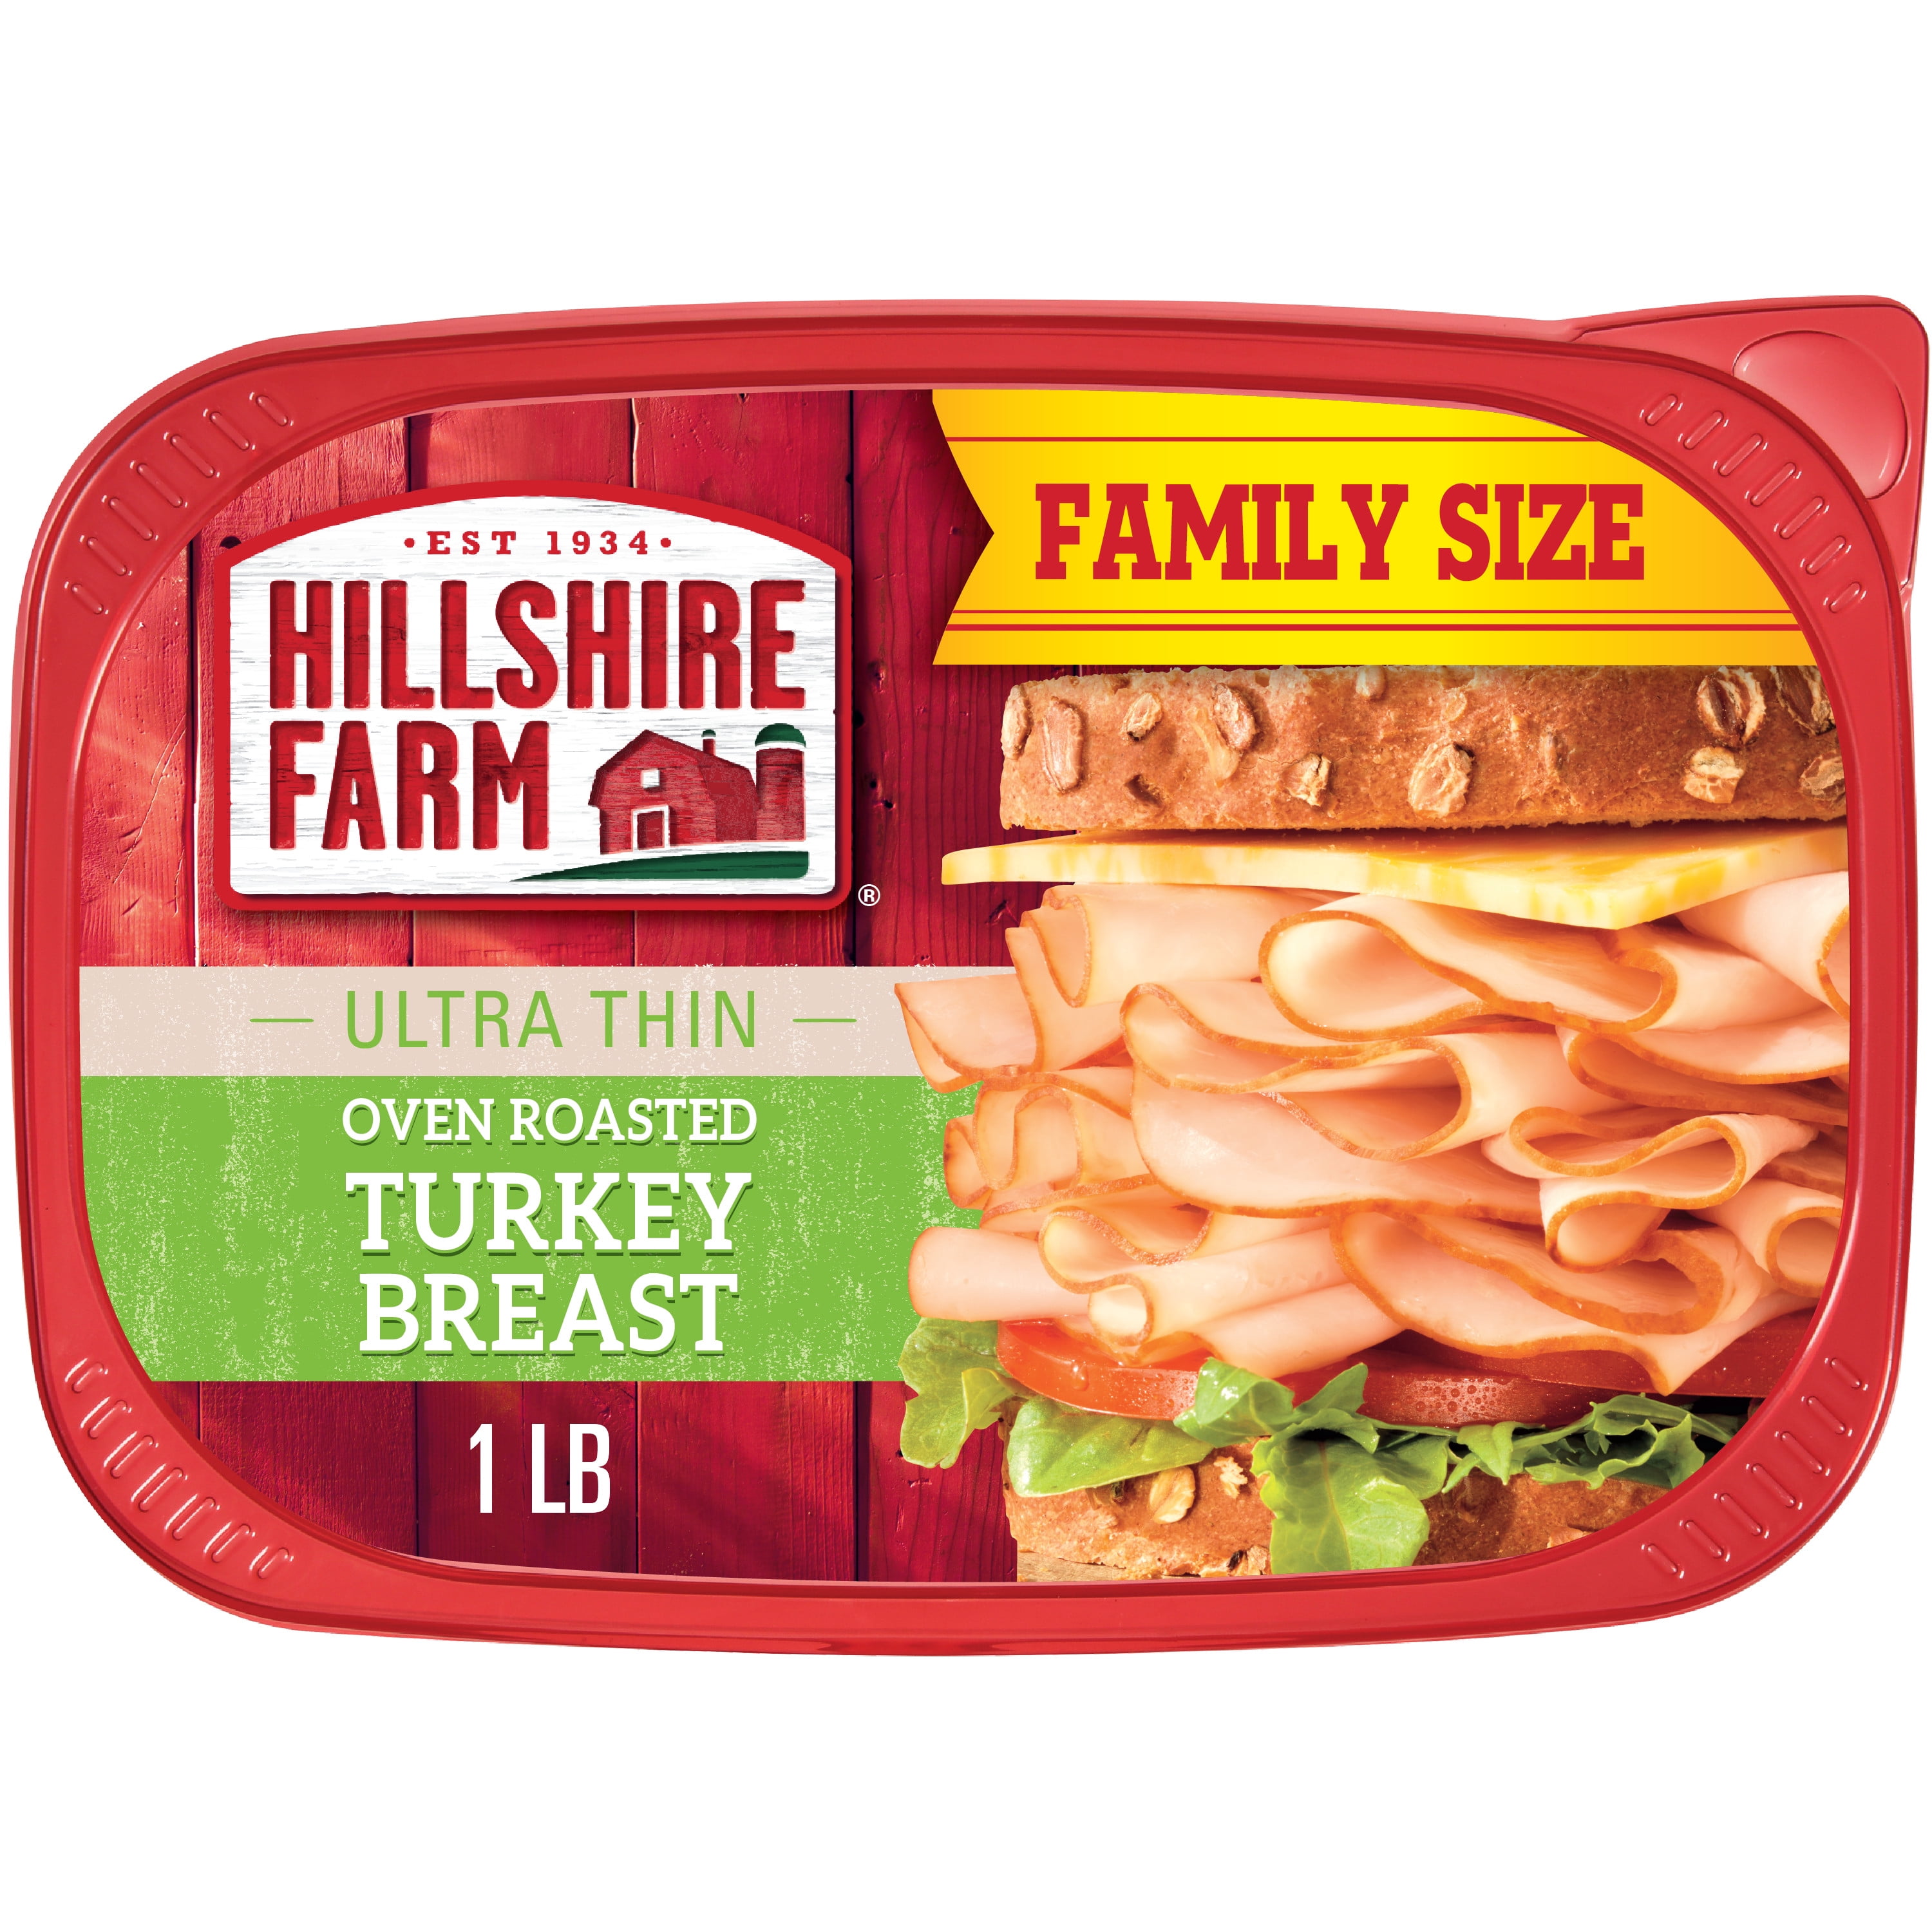 Hillshire Farm Sliced Oven Roasted Turkey Breast Deli Lunch Meat, Family Size, 1 lb